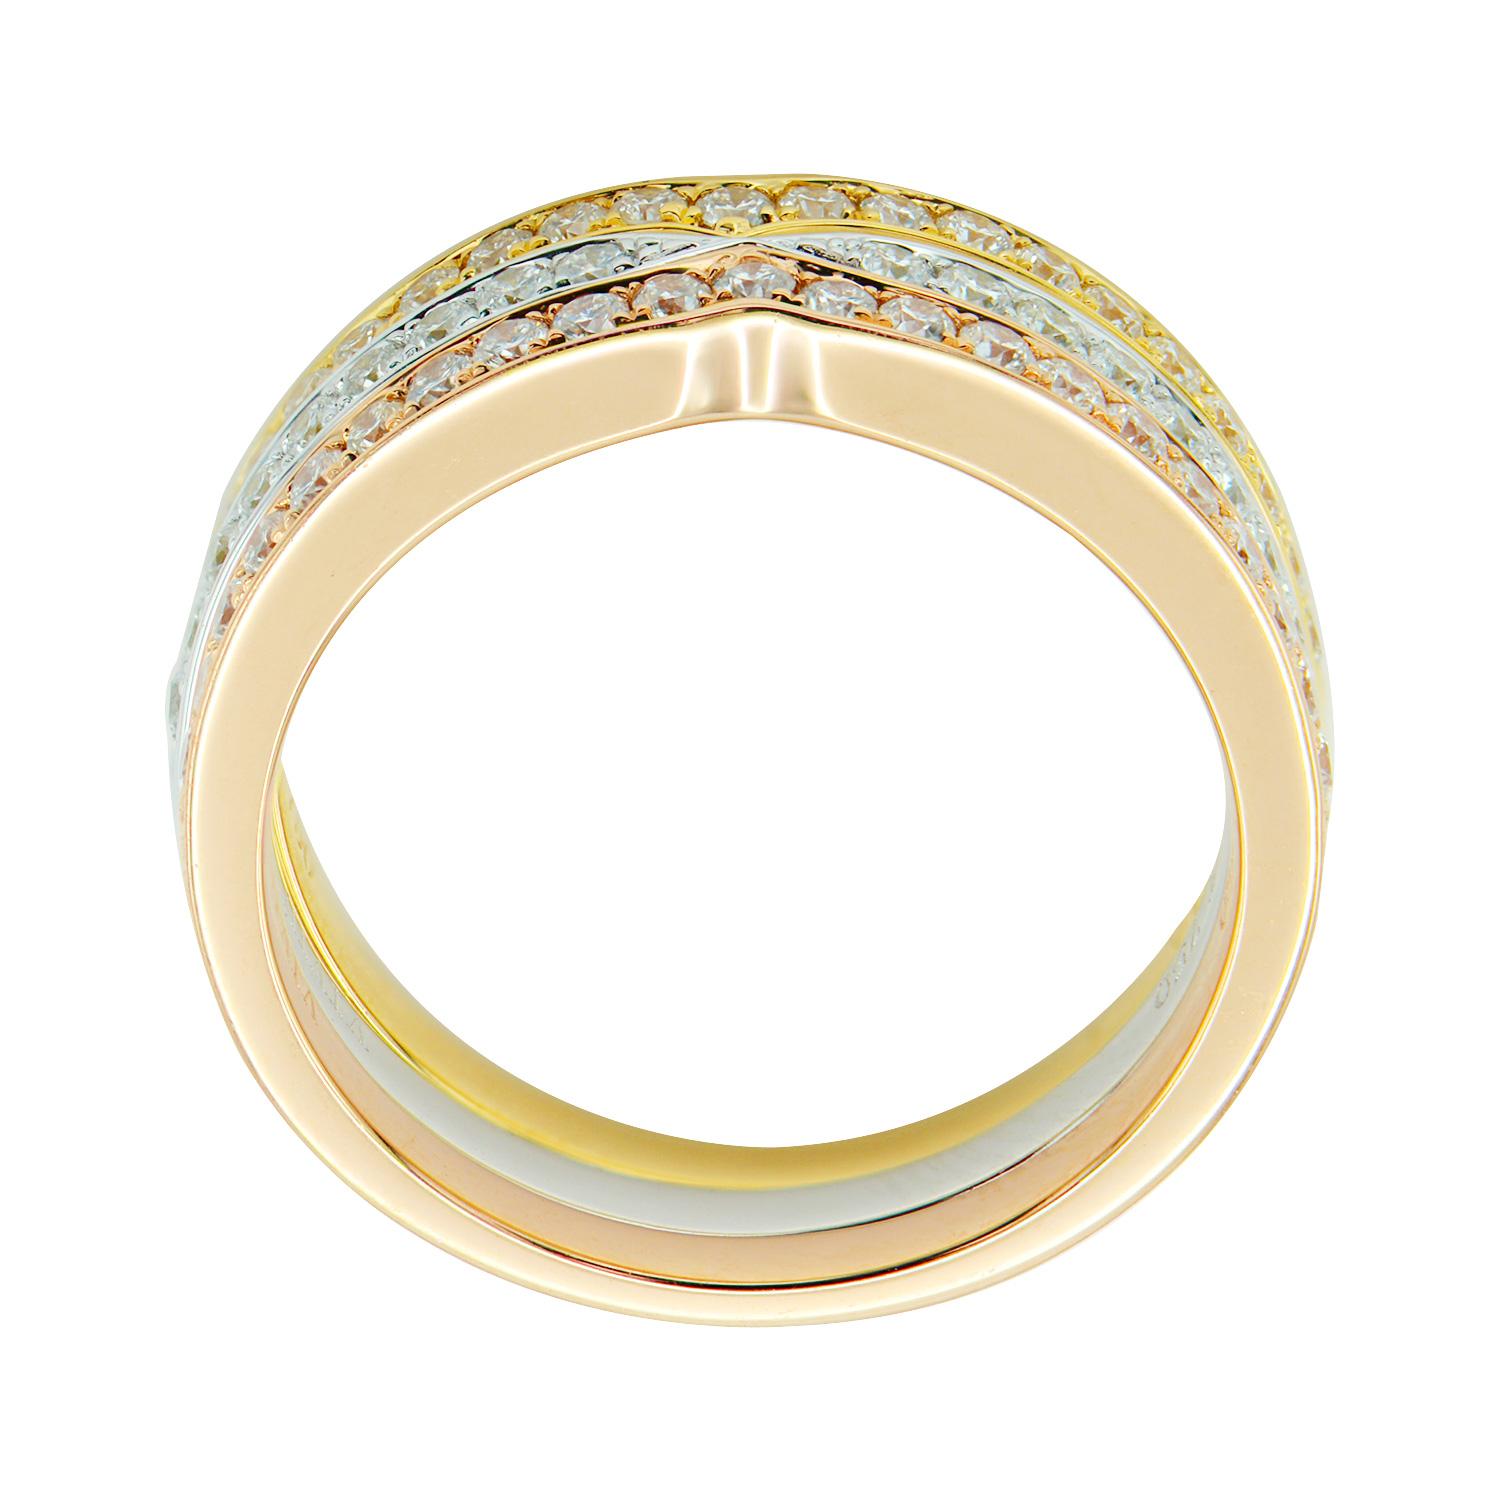 This stylish ring is made of 3 separate bands, one in white gold, one in rose gold, and one in yellow gold, that stack together beautifully. Each band has diamonds halfway around the band. There are 60 round VS2, G color diamonds totaling 0.67